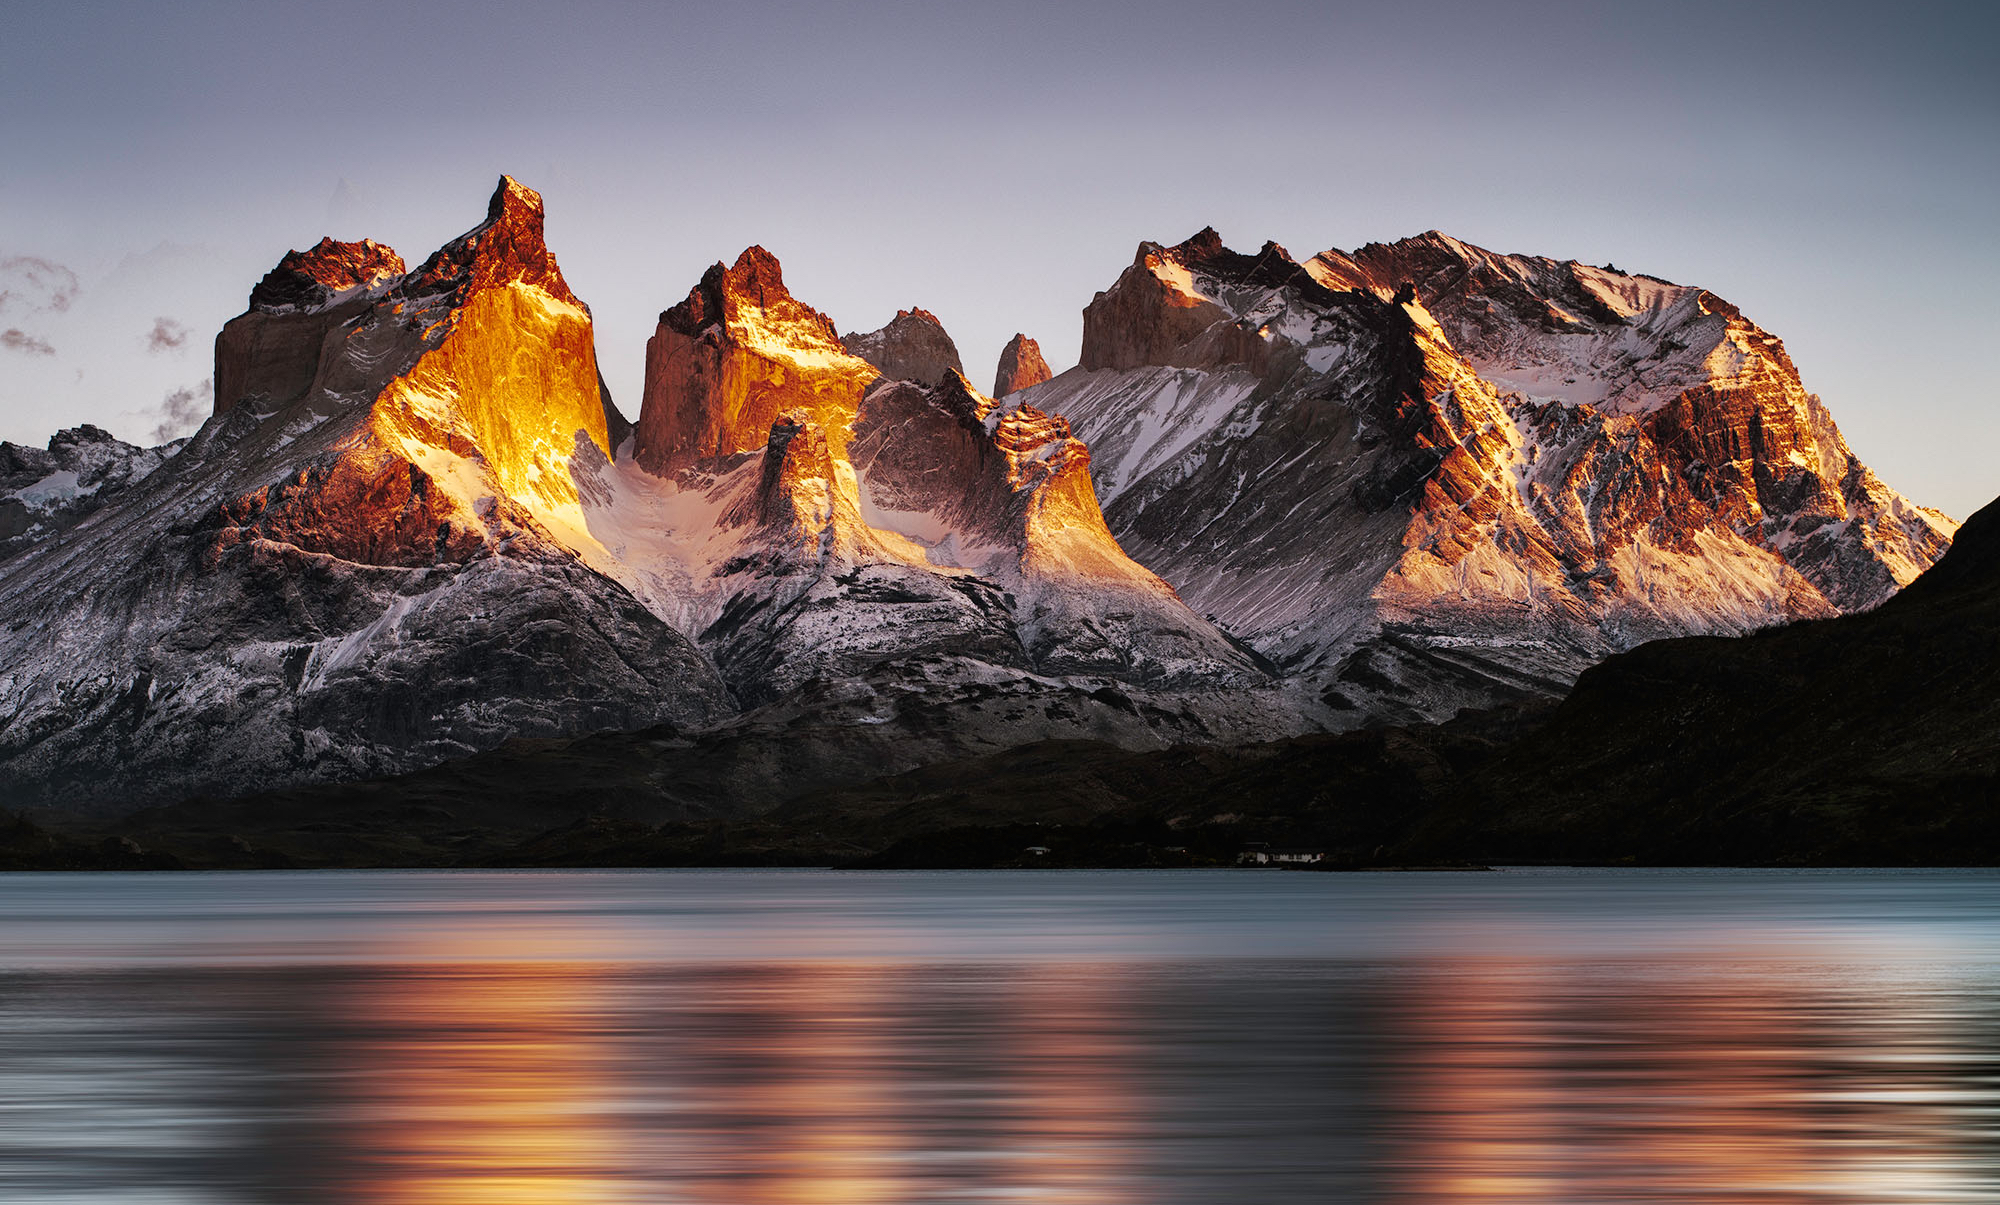 Step-by-Step: How I Captured & Post-Processed My Very Popular Image of Torres del Paine